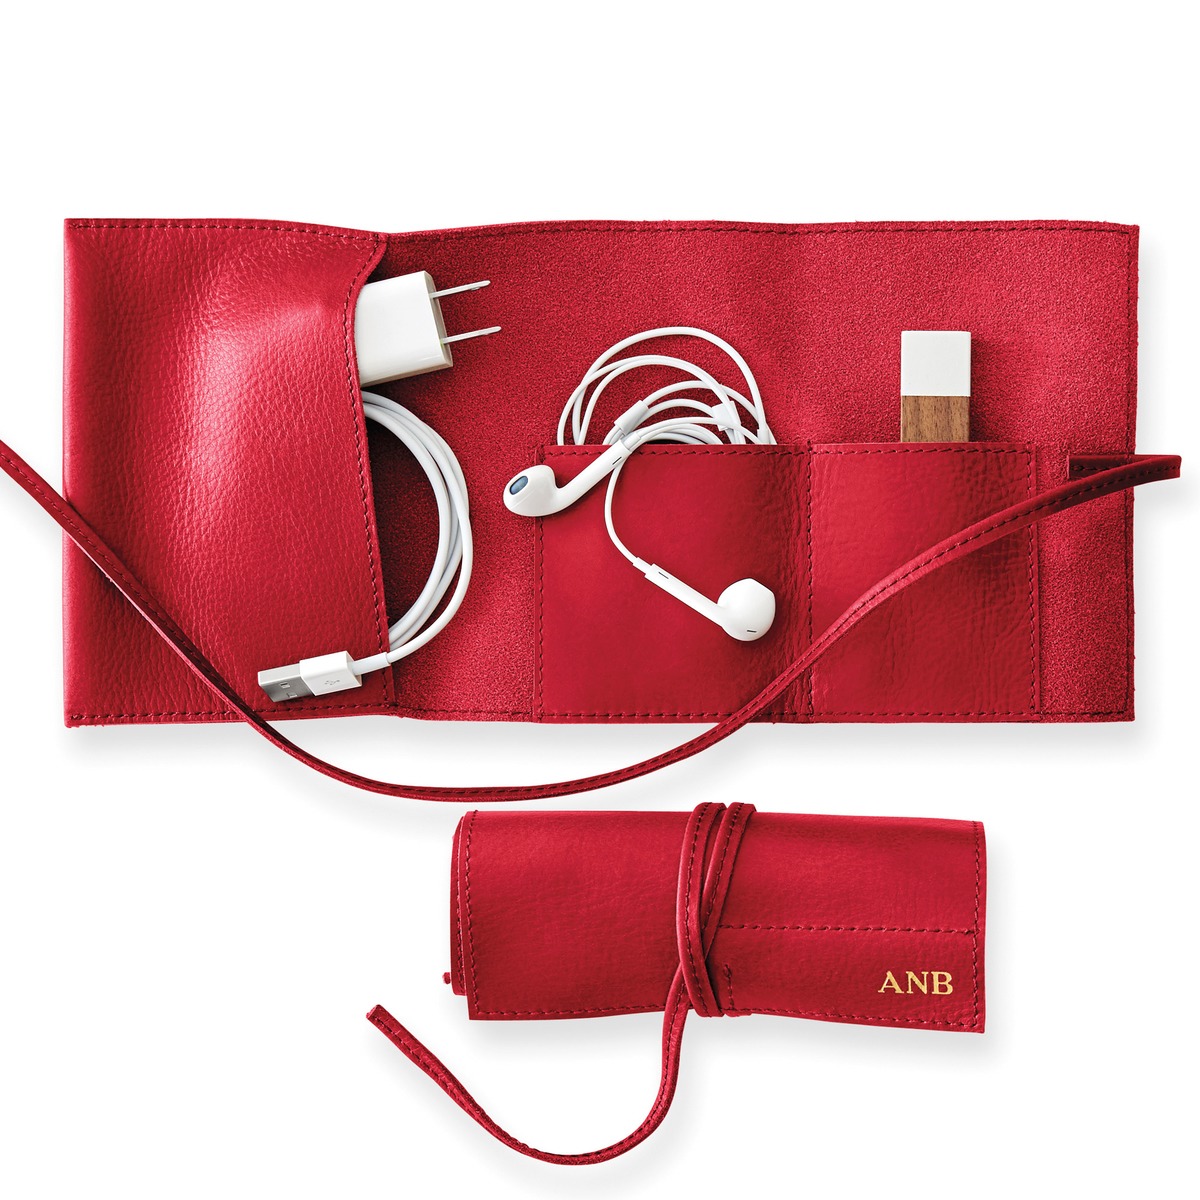 8 Travel Accessories With A Pop Of Color